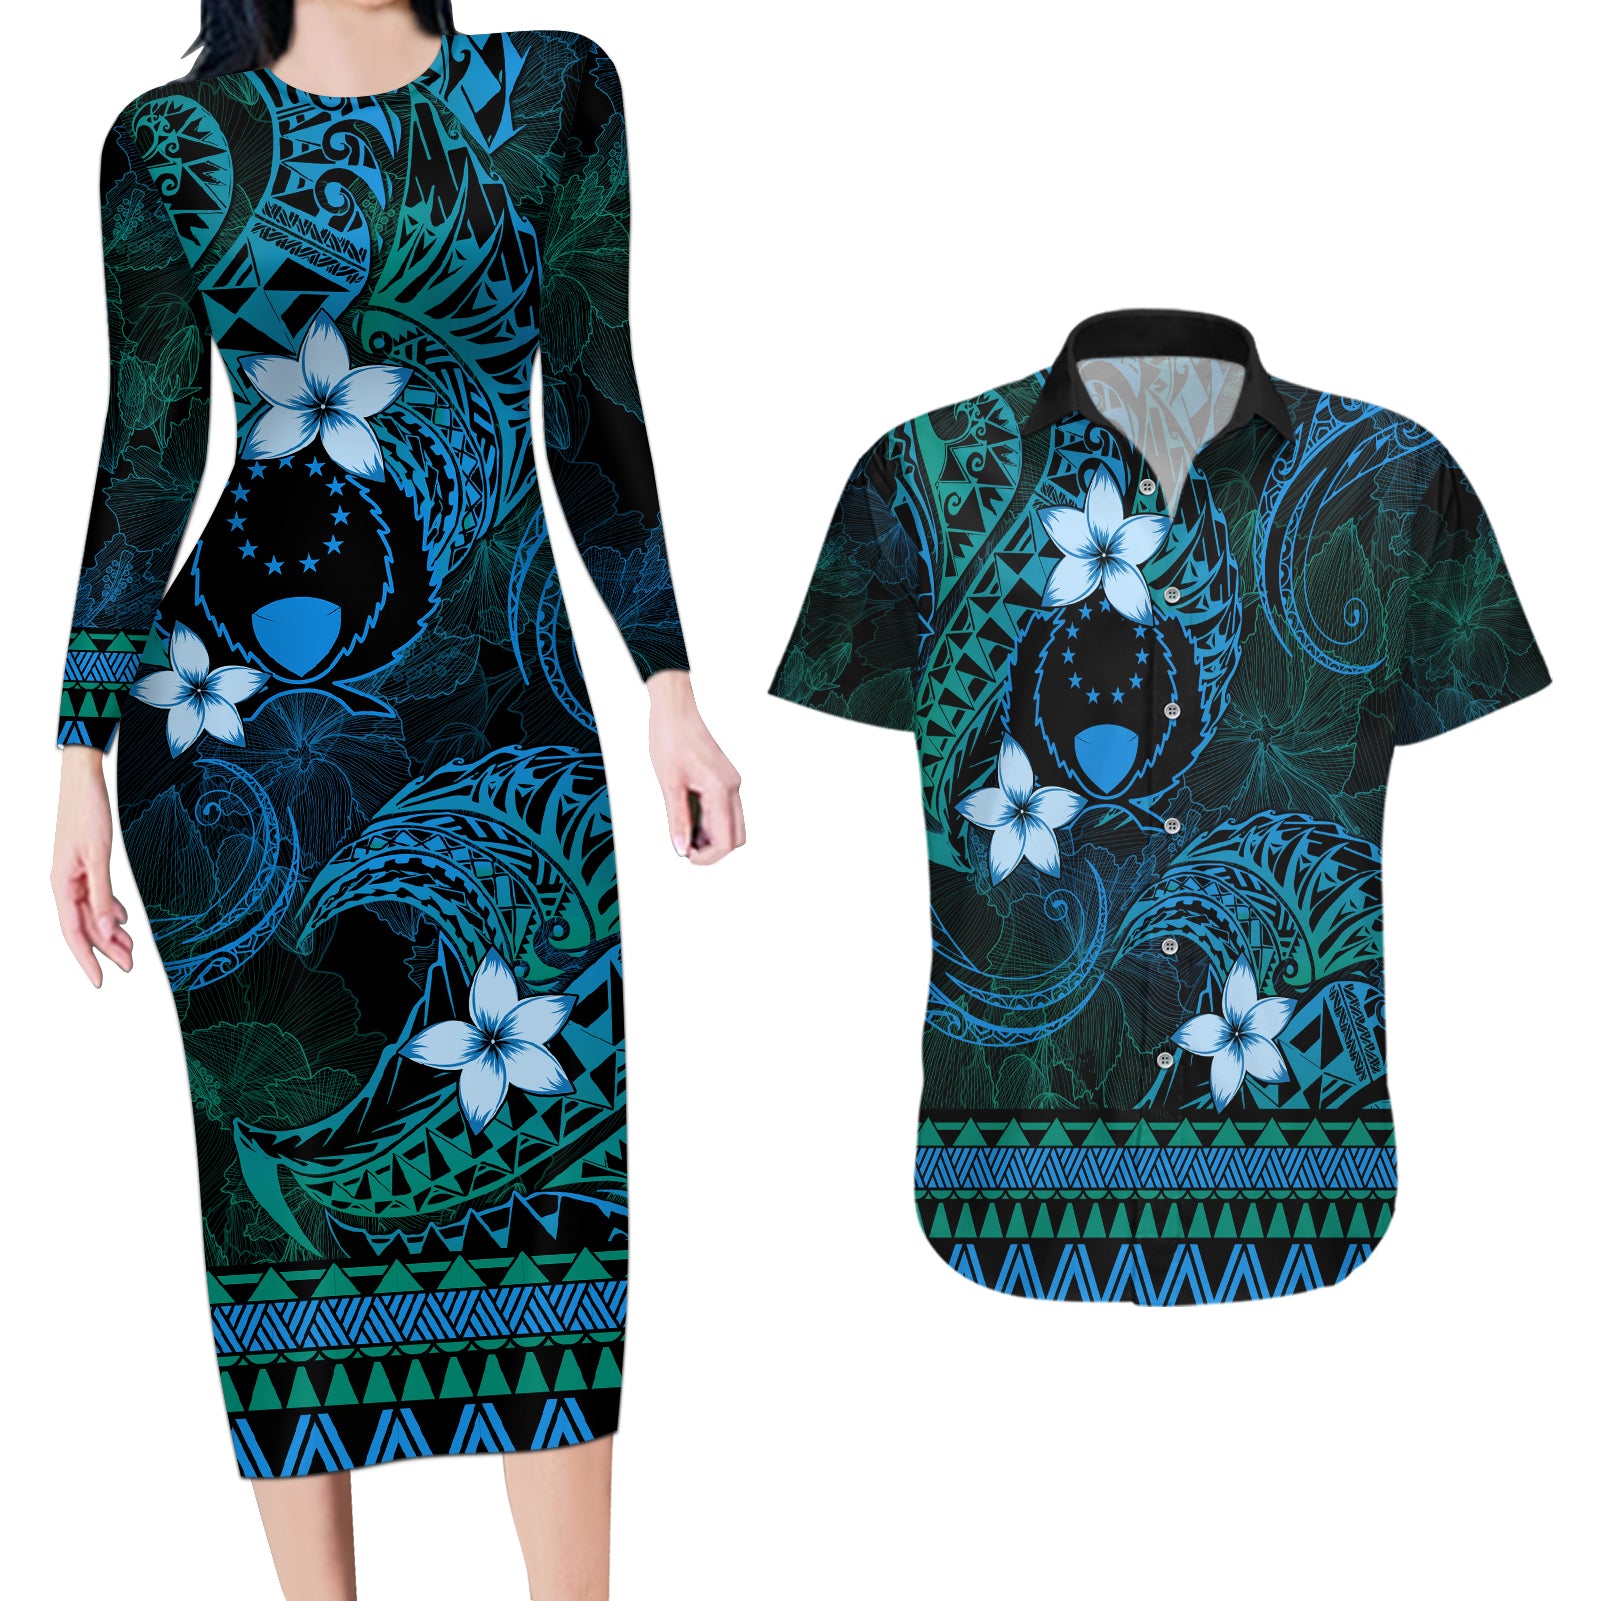 FSM Pohnpei State Couples Matching Long Sleeve Bodycon Dress and Hawaiian Shirt Tribal Pattern Ocean Version LT01 Blue - Polynesian Pride